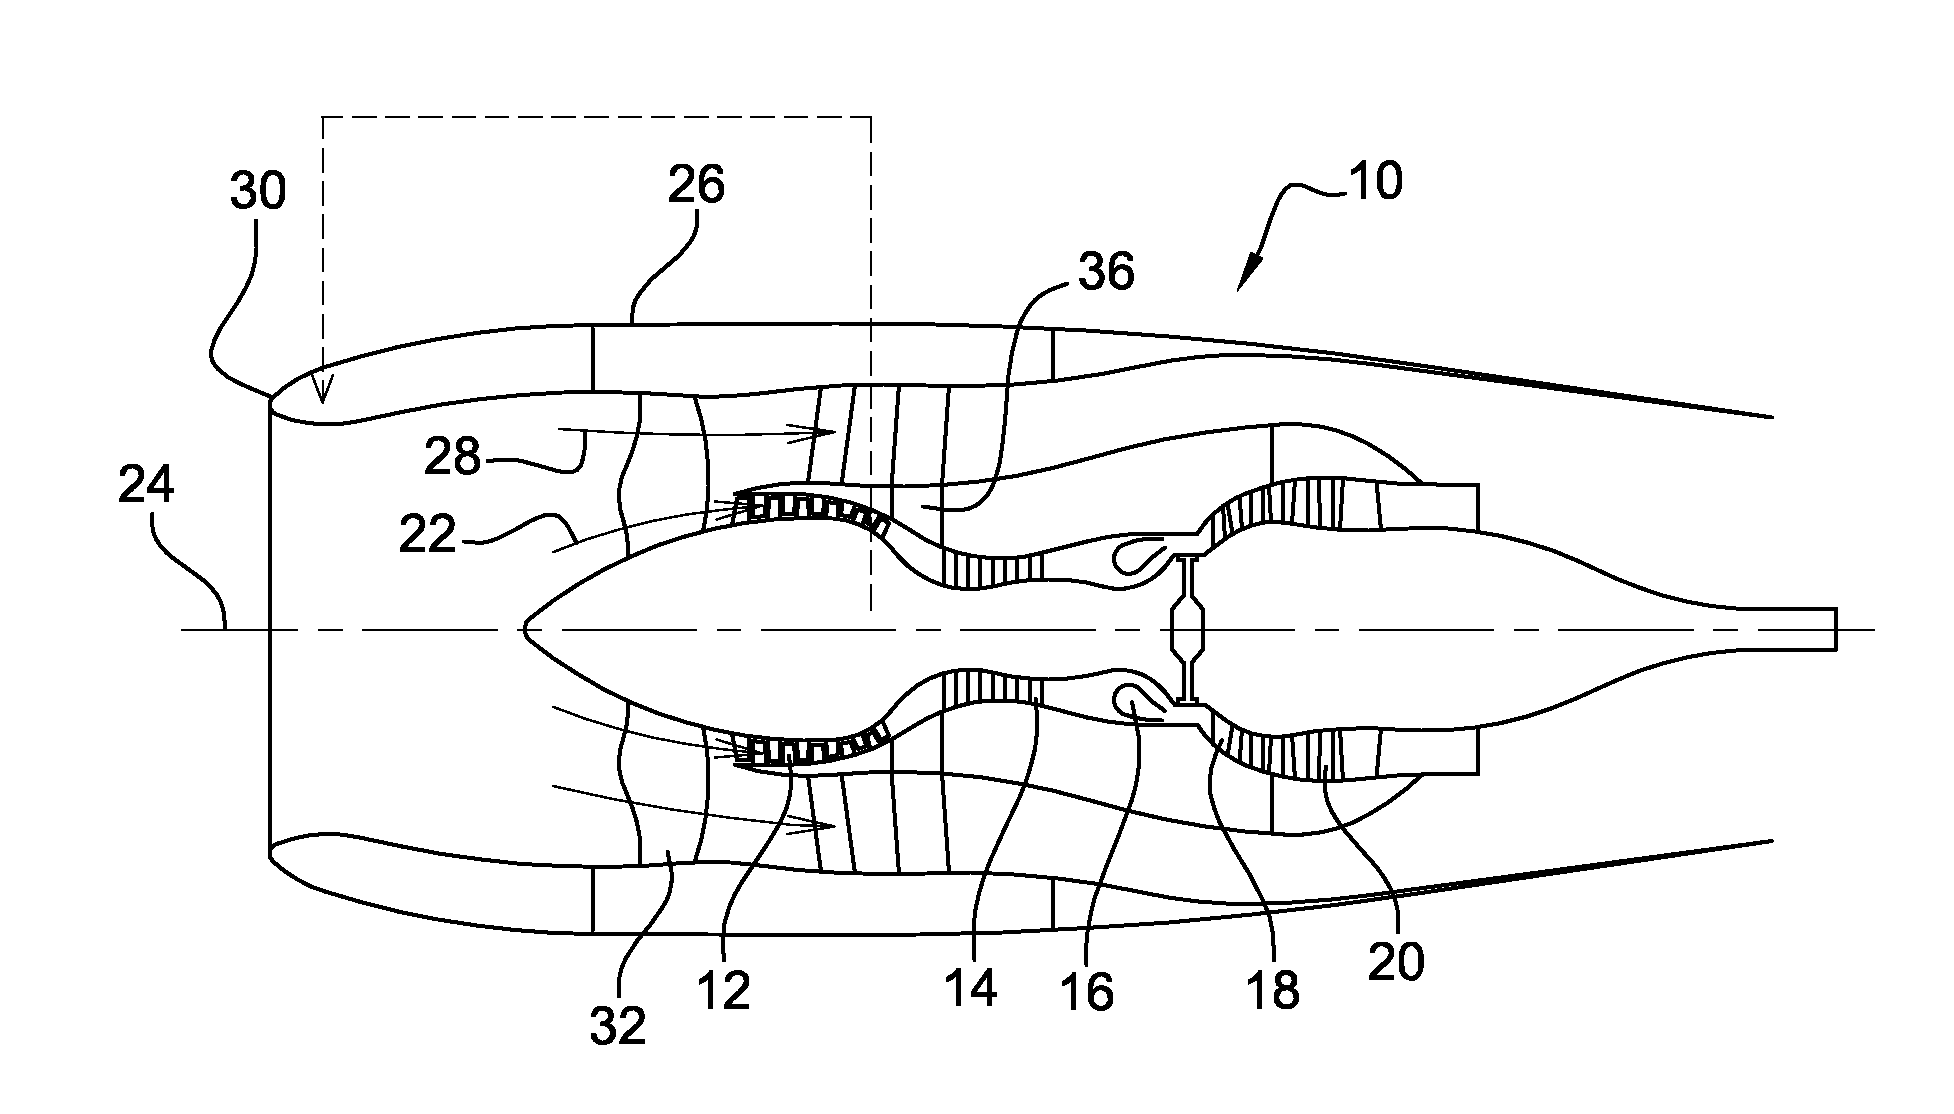 Circuit for de-icing an air inlet lip of an aircraft propulsion assembly